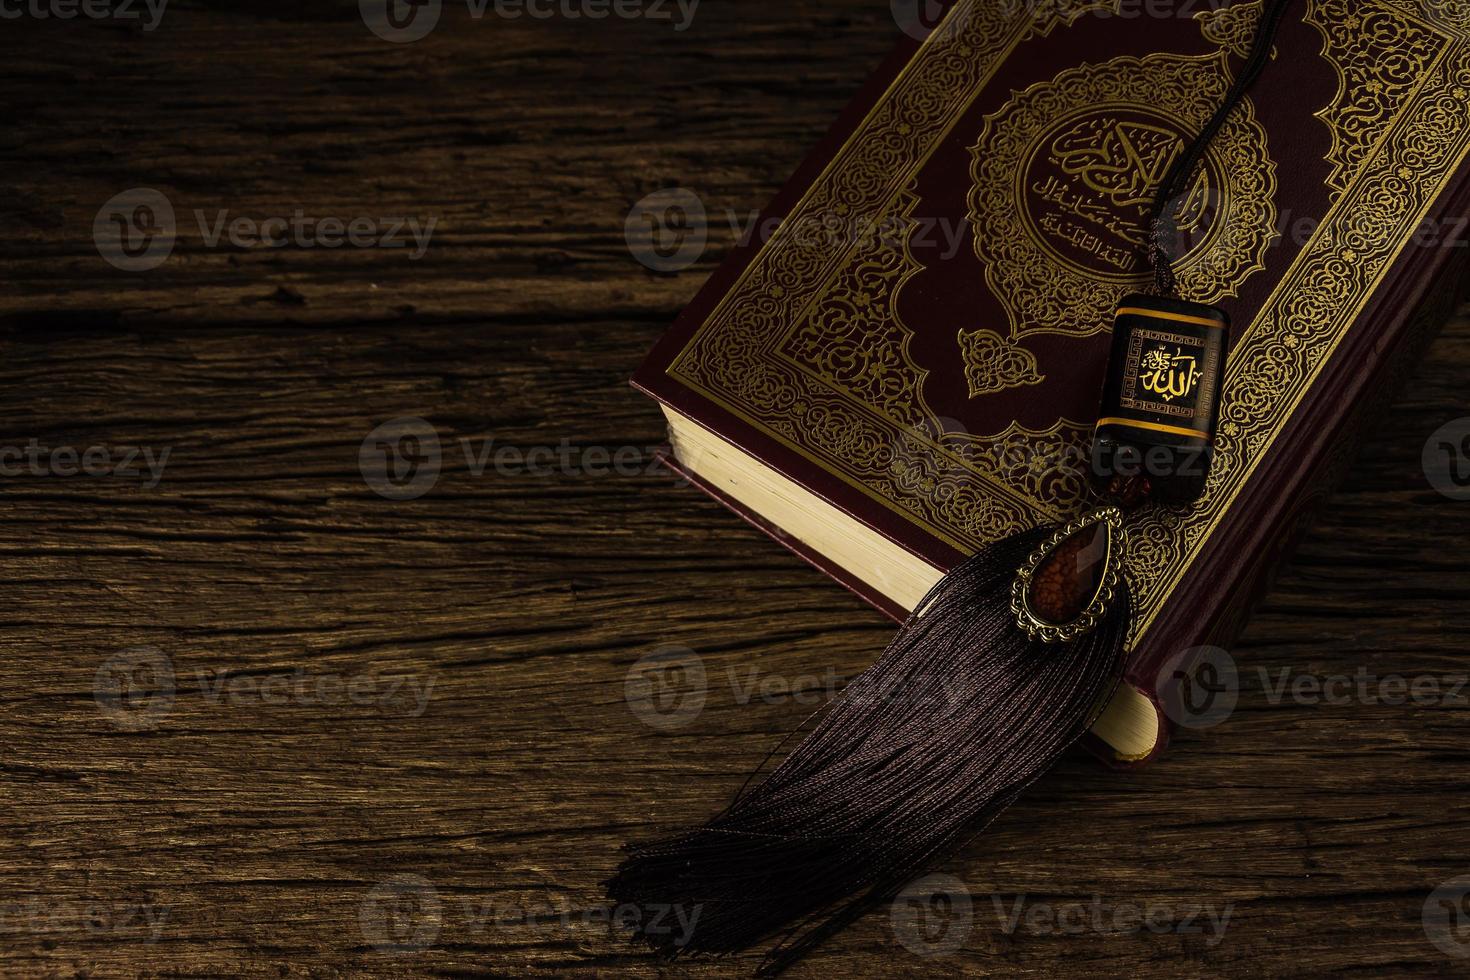 allah god of Islam with Koran - holy book of Muslims  public item of all muslims  on the table  still life photo